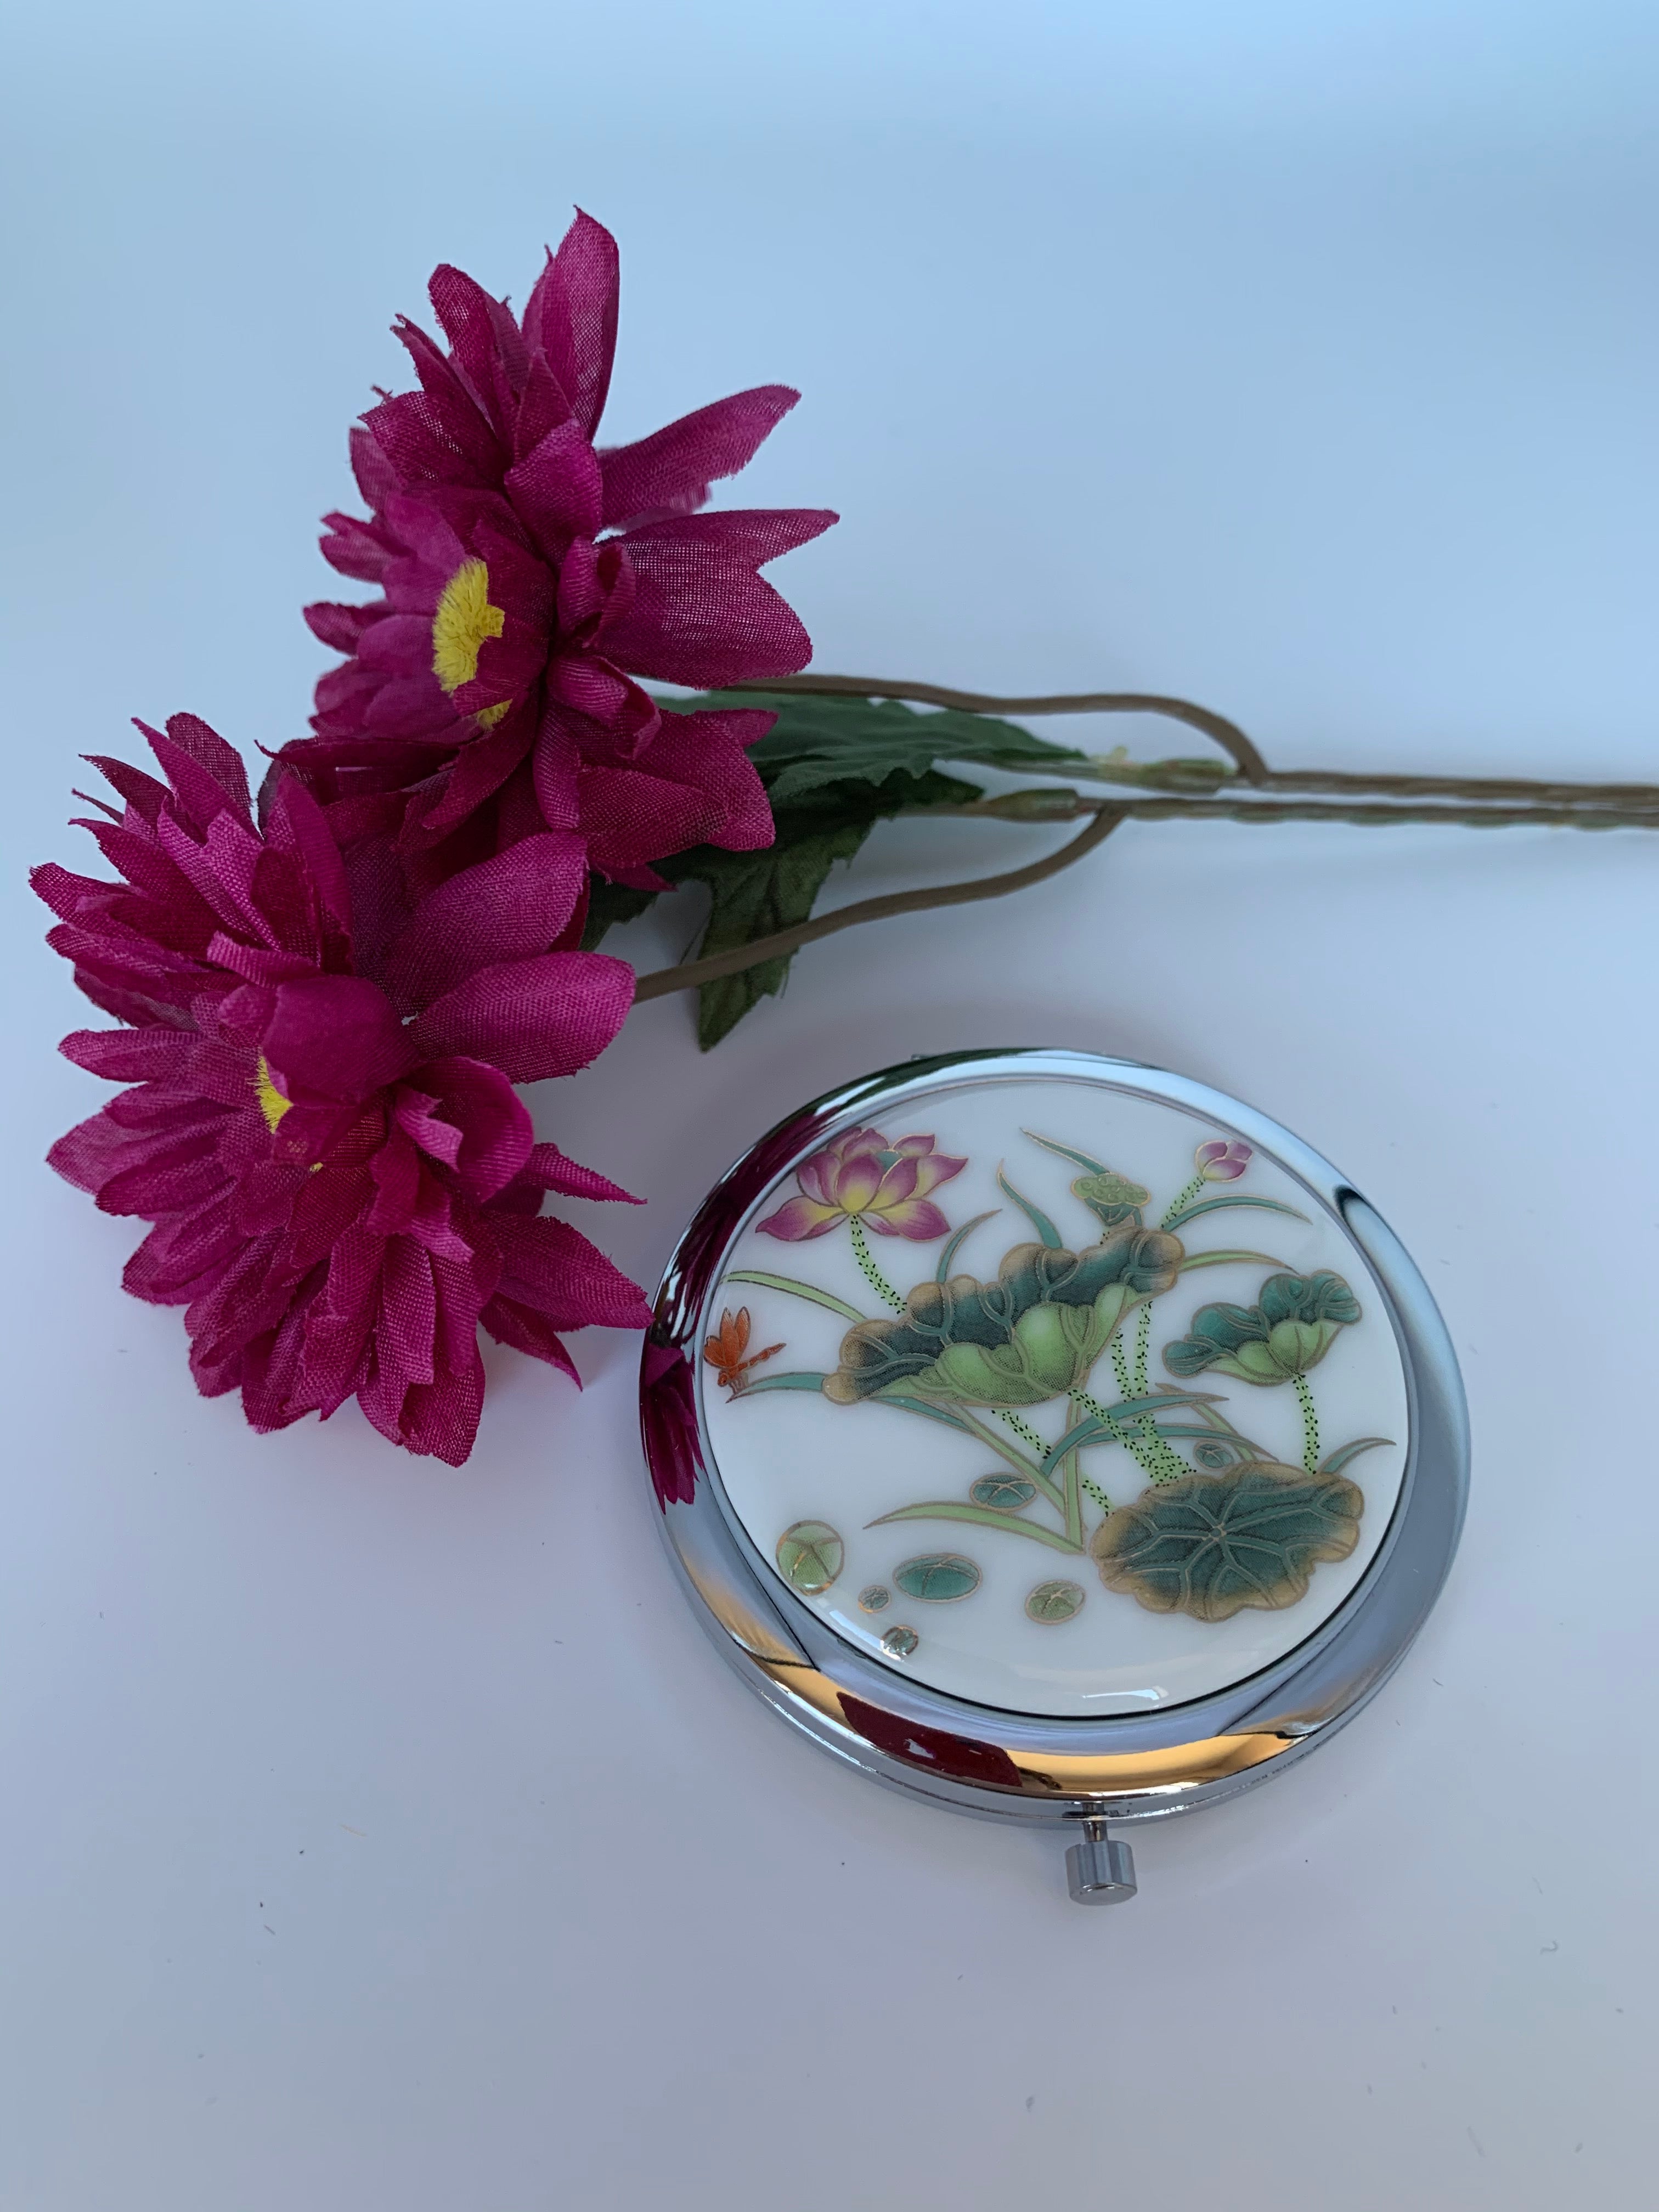 Second view. Great little compact mirror for purse or vanity. It is hinged with 2 mirrors.Aand the lotus adds a beautiful and spiritual touch. It is functional and also elegant. I keep mine out on my bathroom counter because it is so pretty to look at. The lotus flower is a sacred symbol reminding us that we all must push through the mud to get to the light. It stands for purity, strength and enlightenment. It is approximately 2¾" across. Great gift, great price - $5.00.